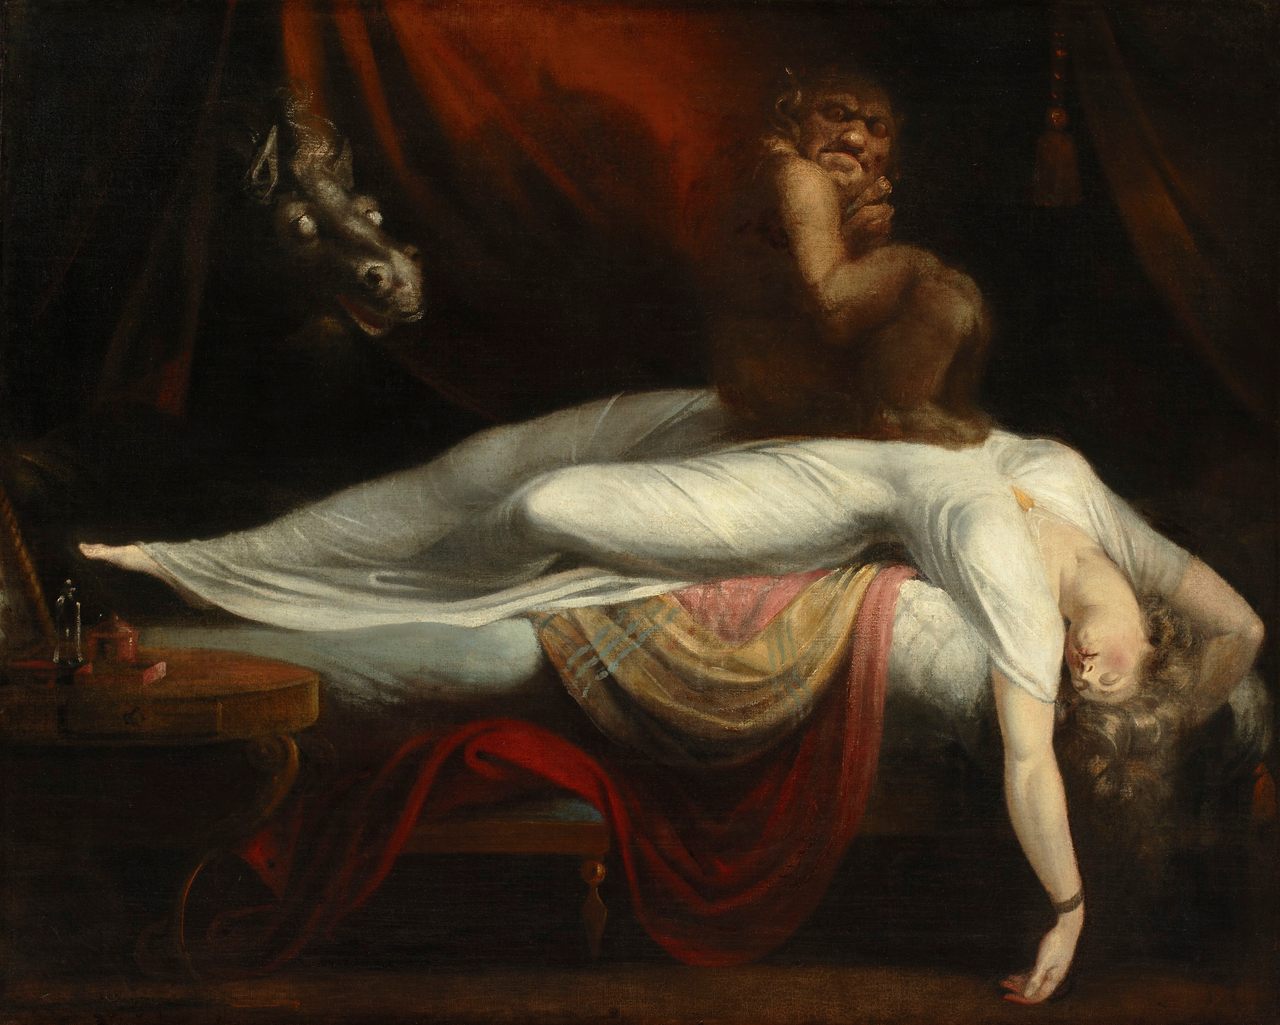 <em>The Nightmare</em> (1781) by Henry Fuseli taps into superstitions about sleep paralysis, a kind of parasomnia, or sleep disorder.